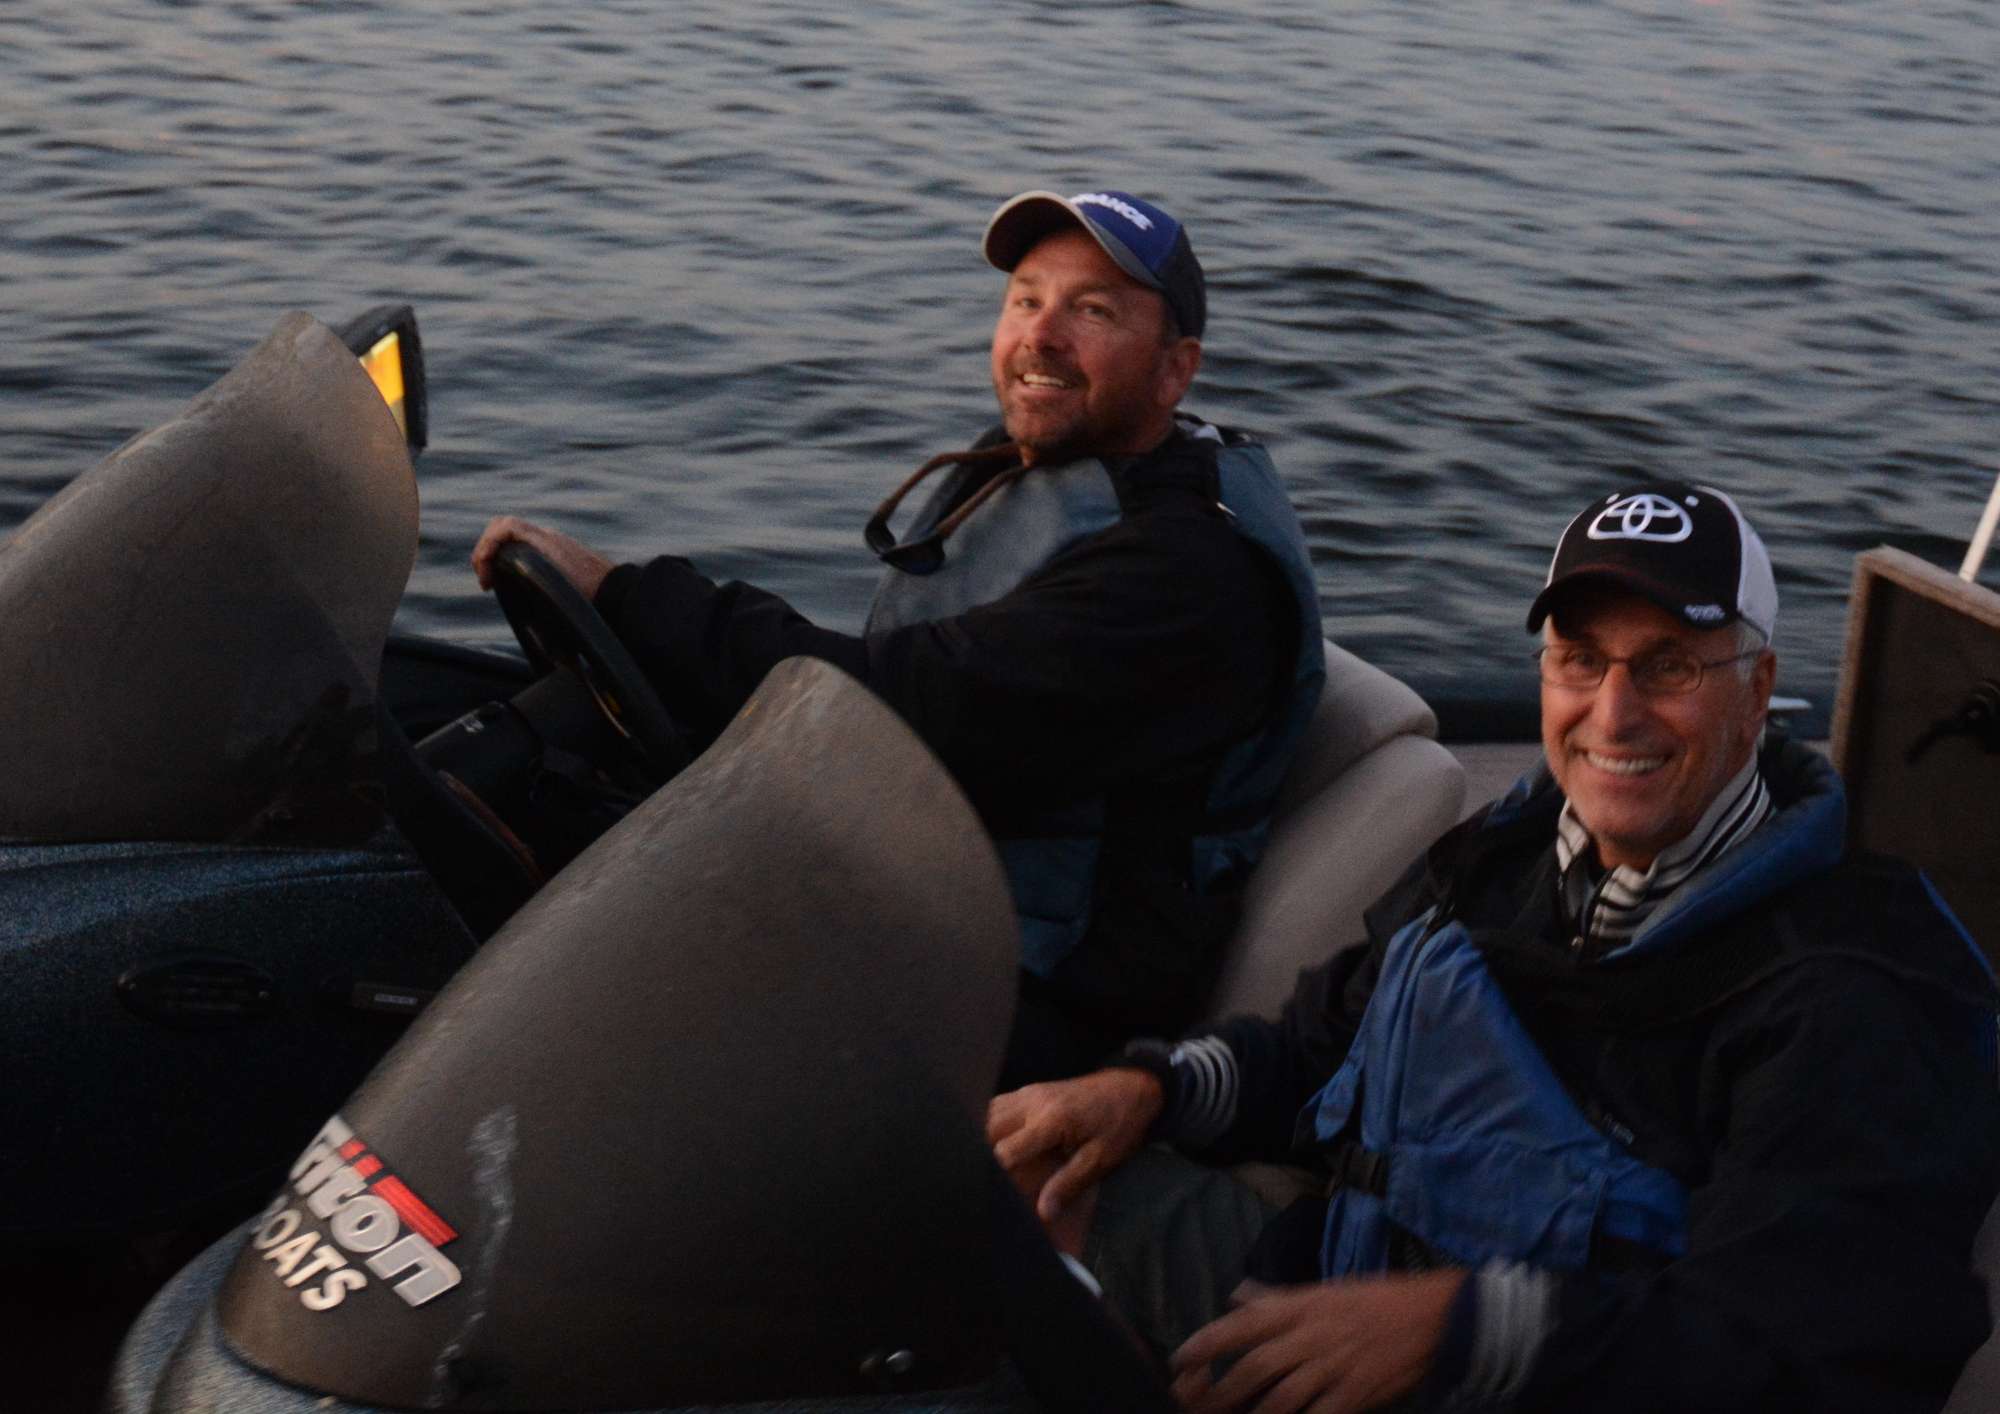 John Knowles of Connecticut drives, and Roy Costa, the Rhode Island B.A.S.S. Nation president, goes out for his first day on the water as an alternate.